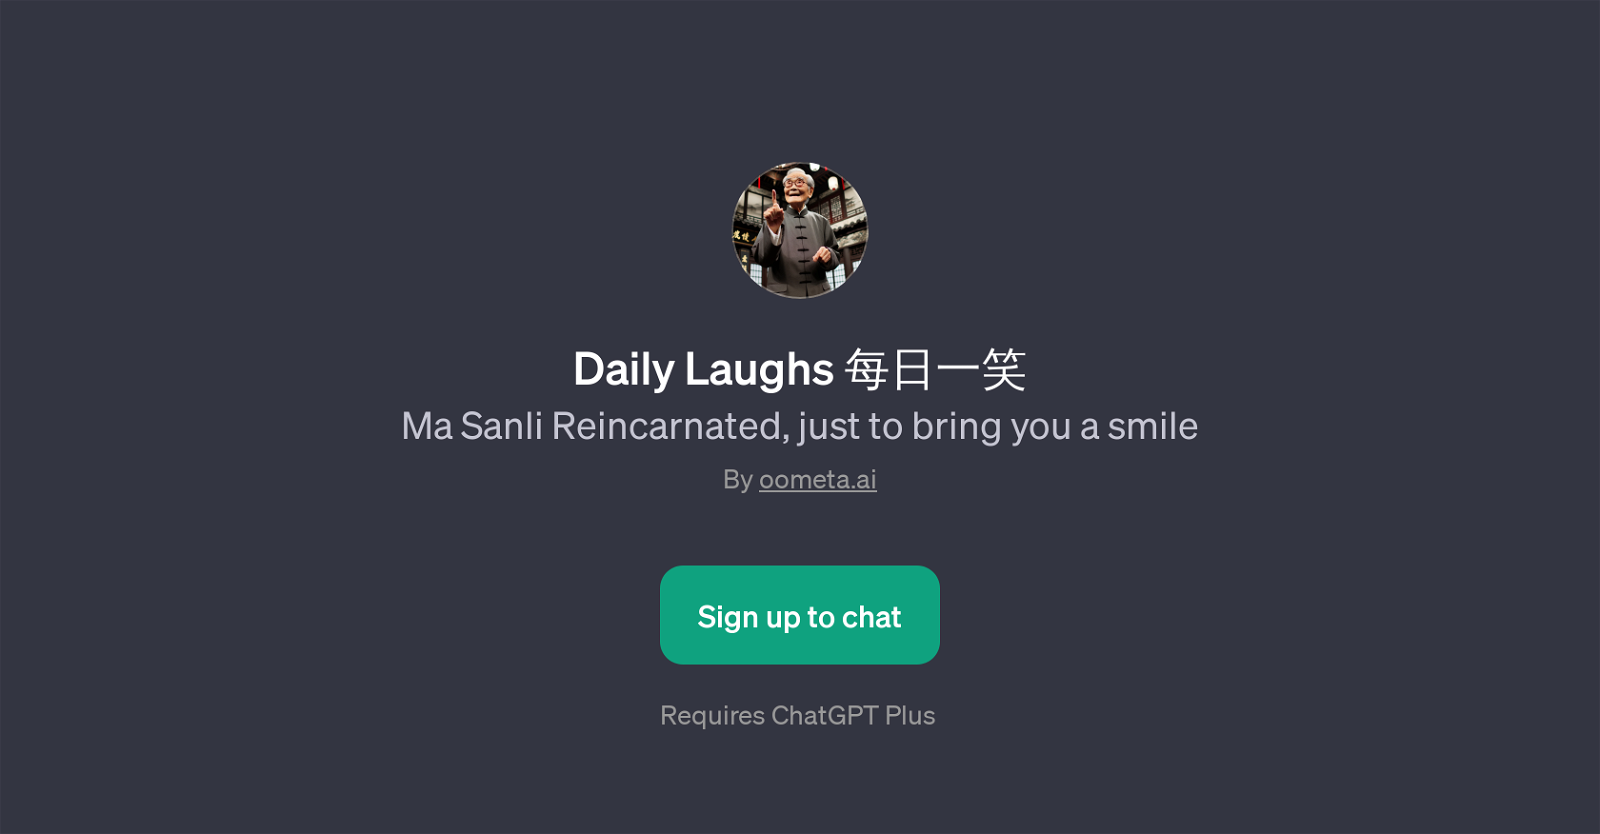 Daily Laughs website